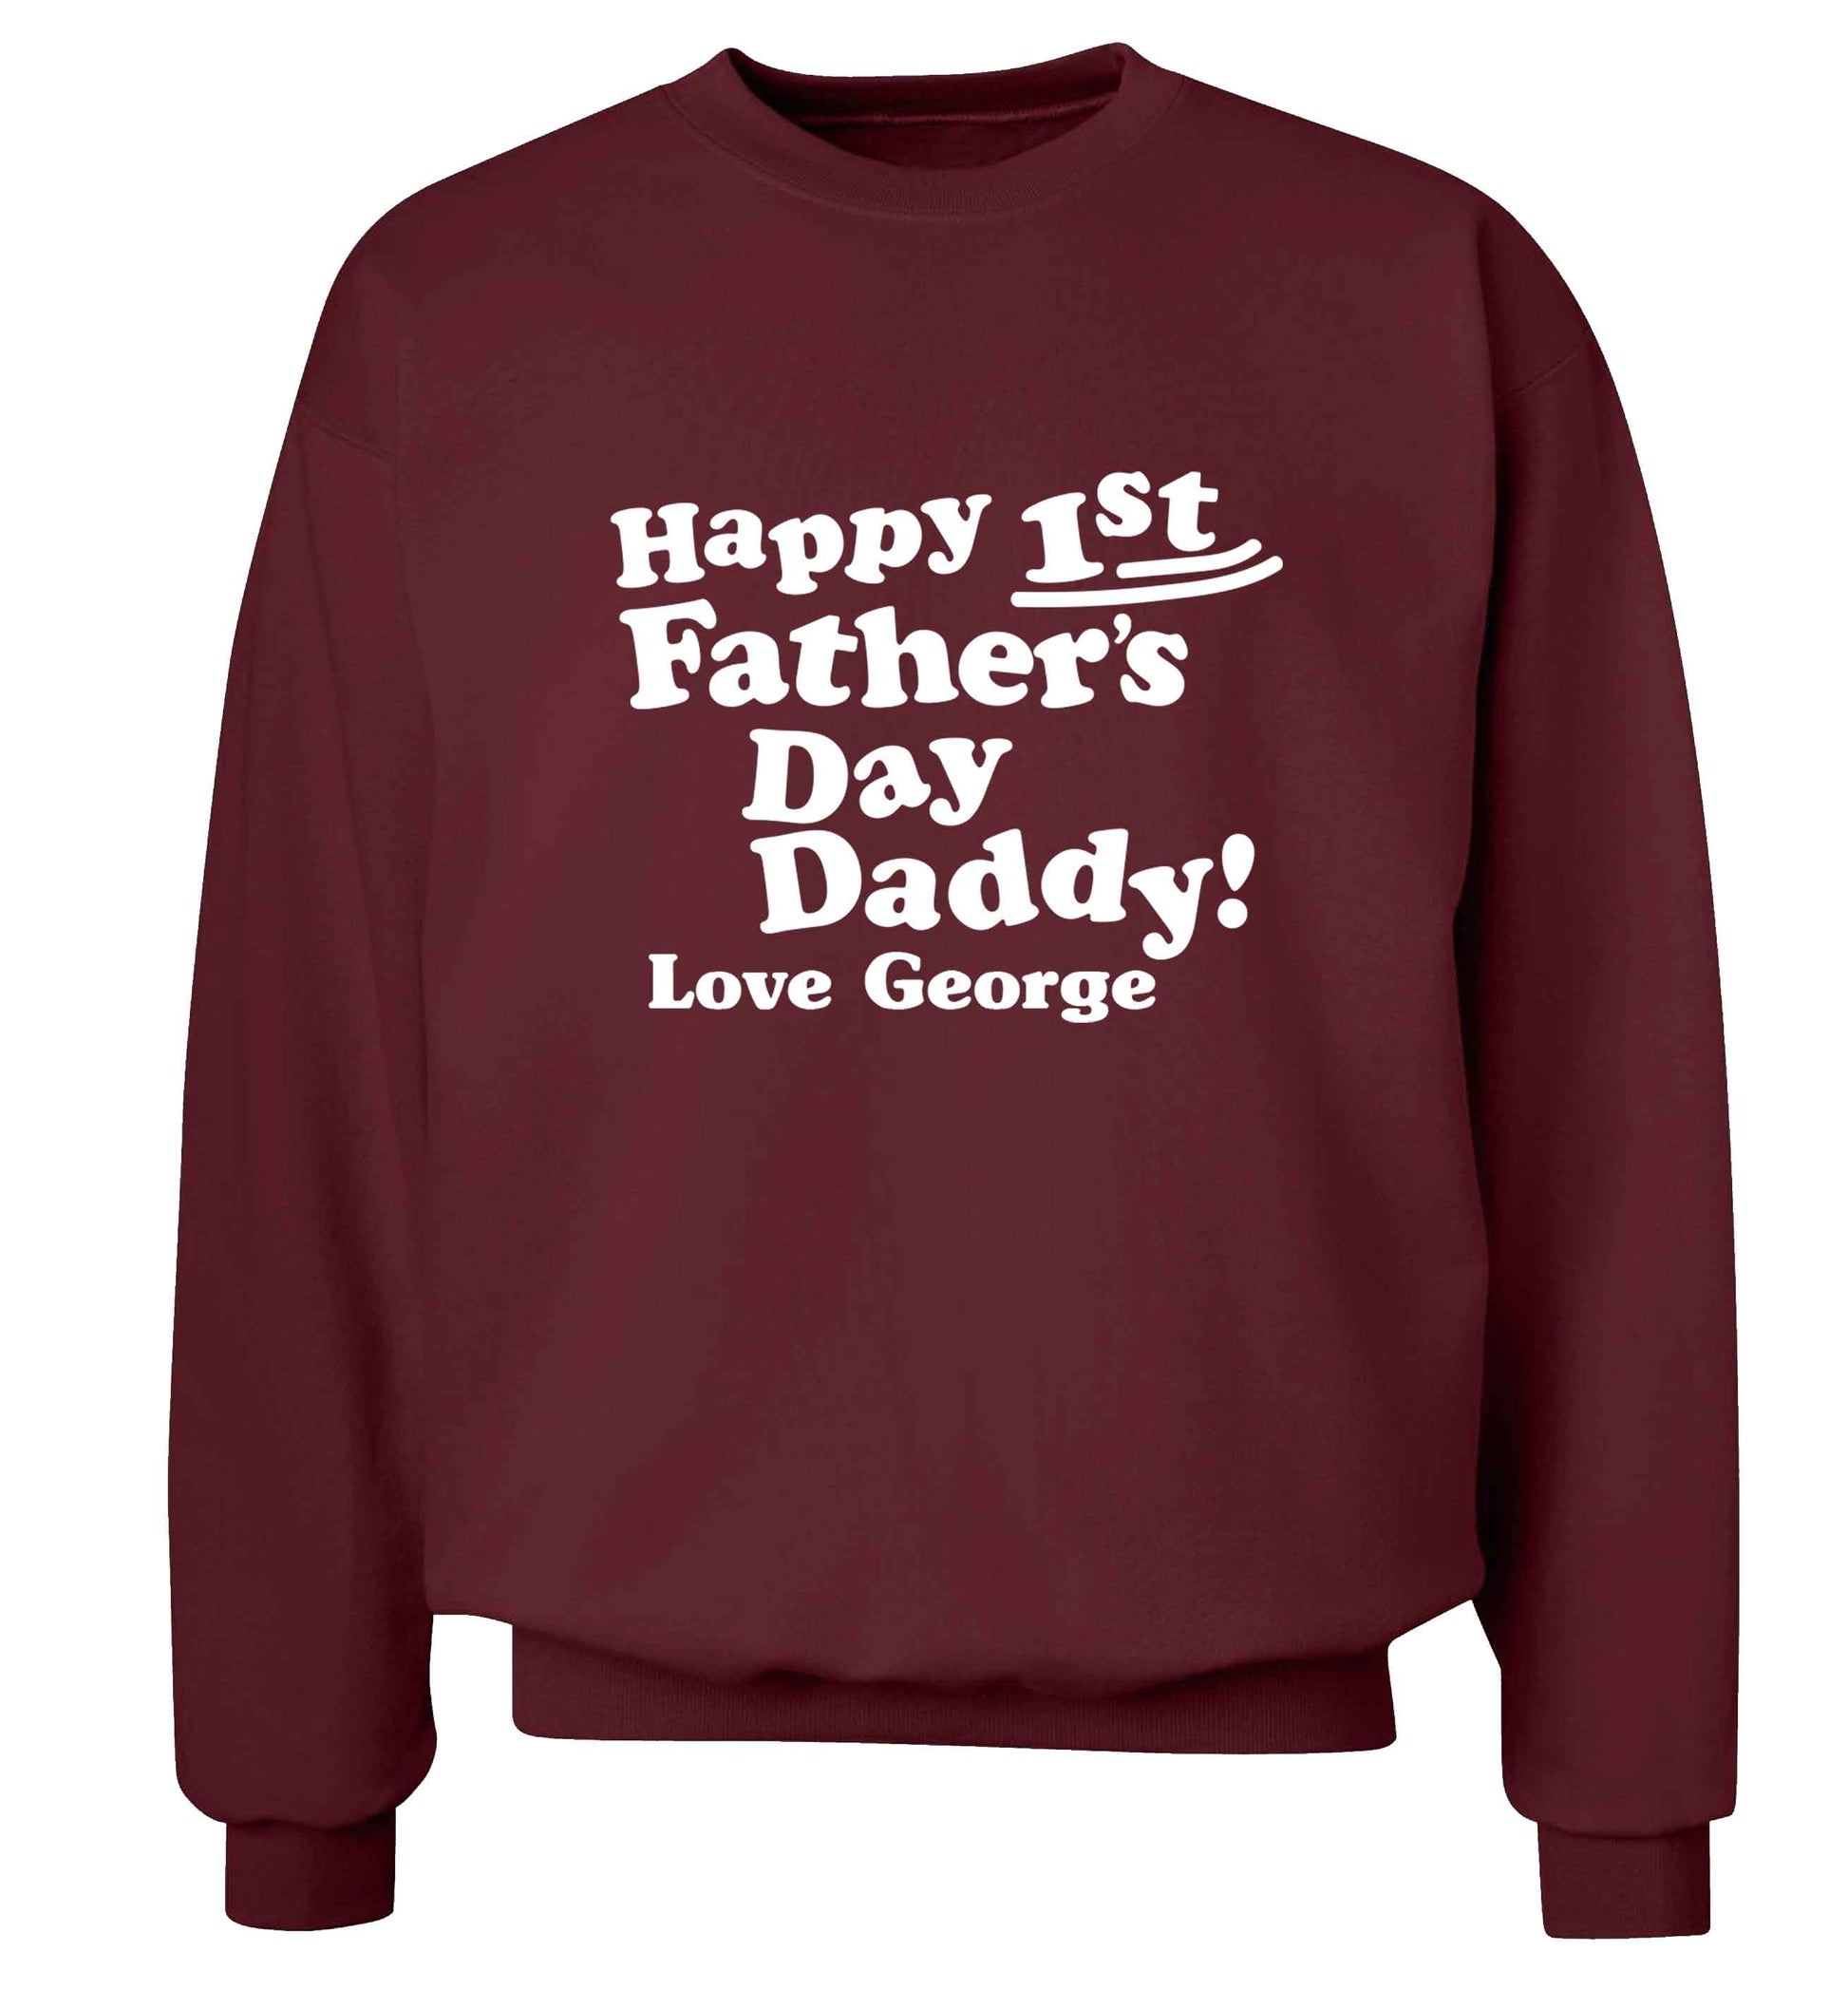 Happy first Fathers Day daddy love personalised adult's unisex maroon sweater 2XL